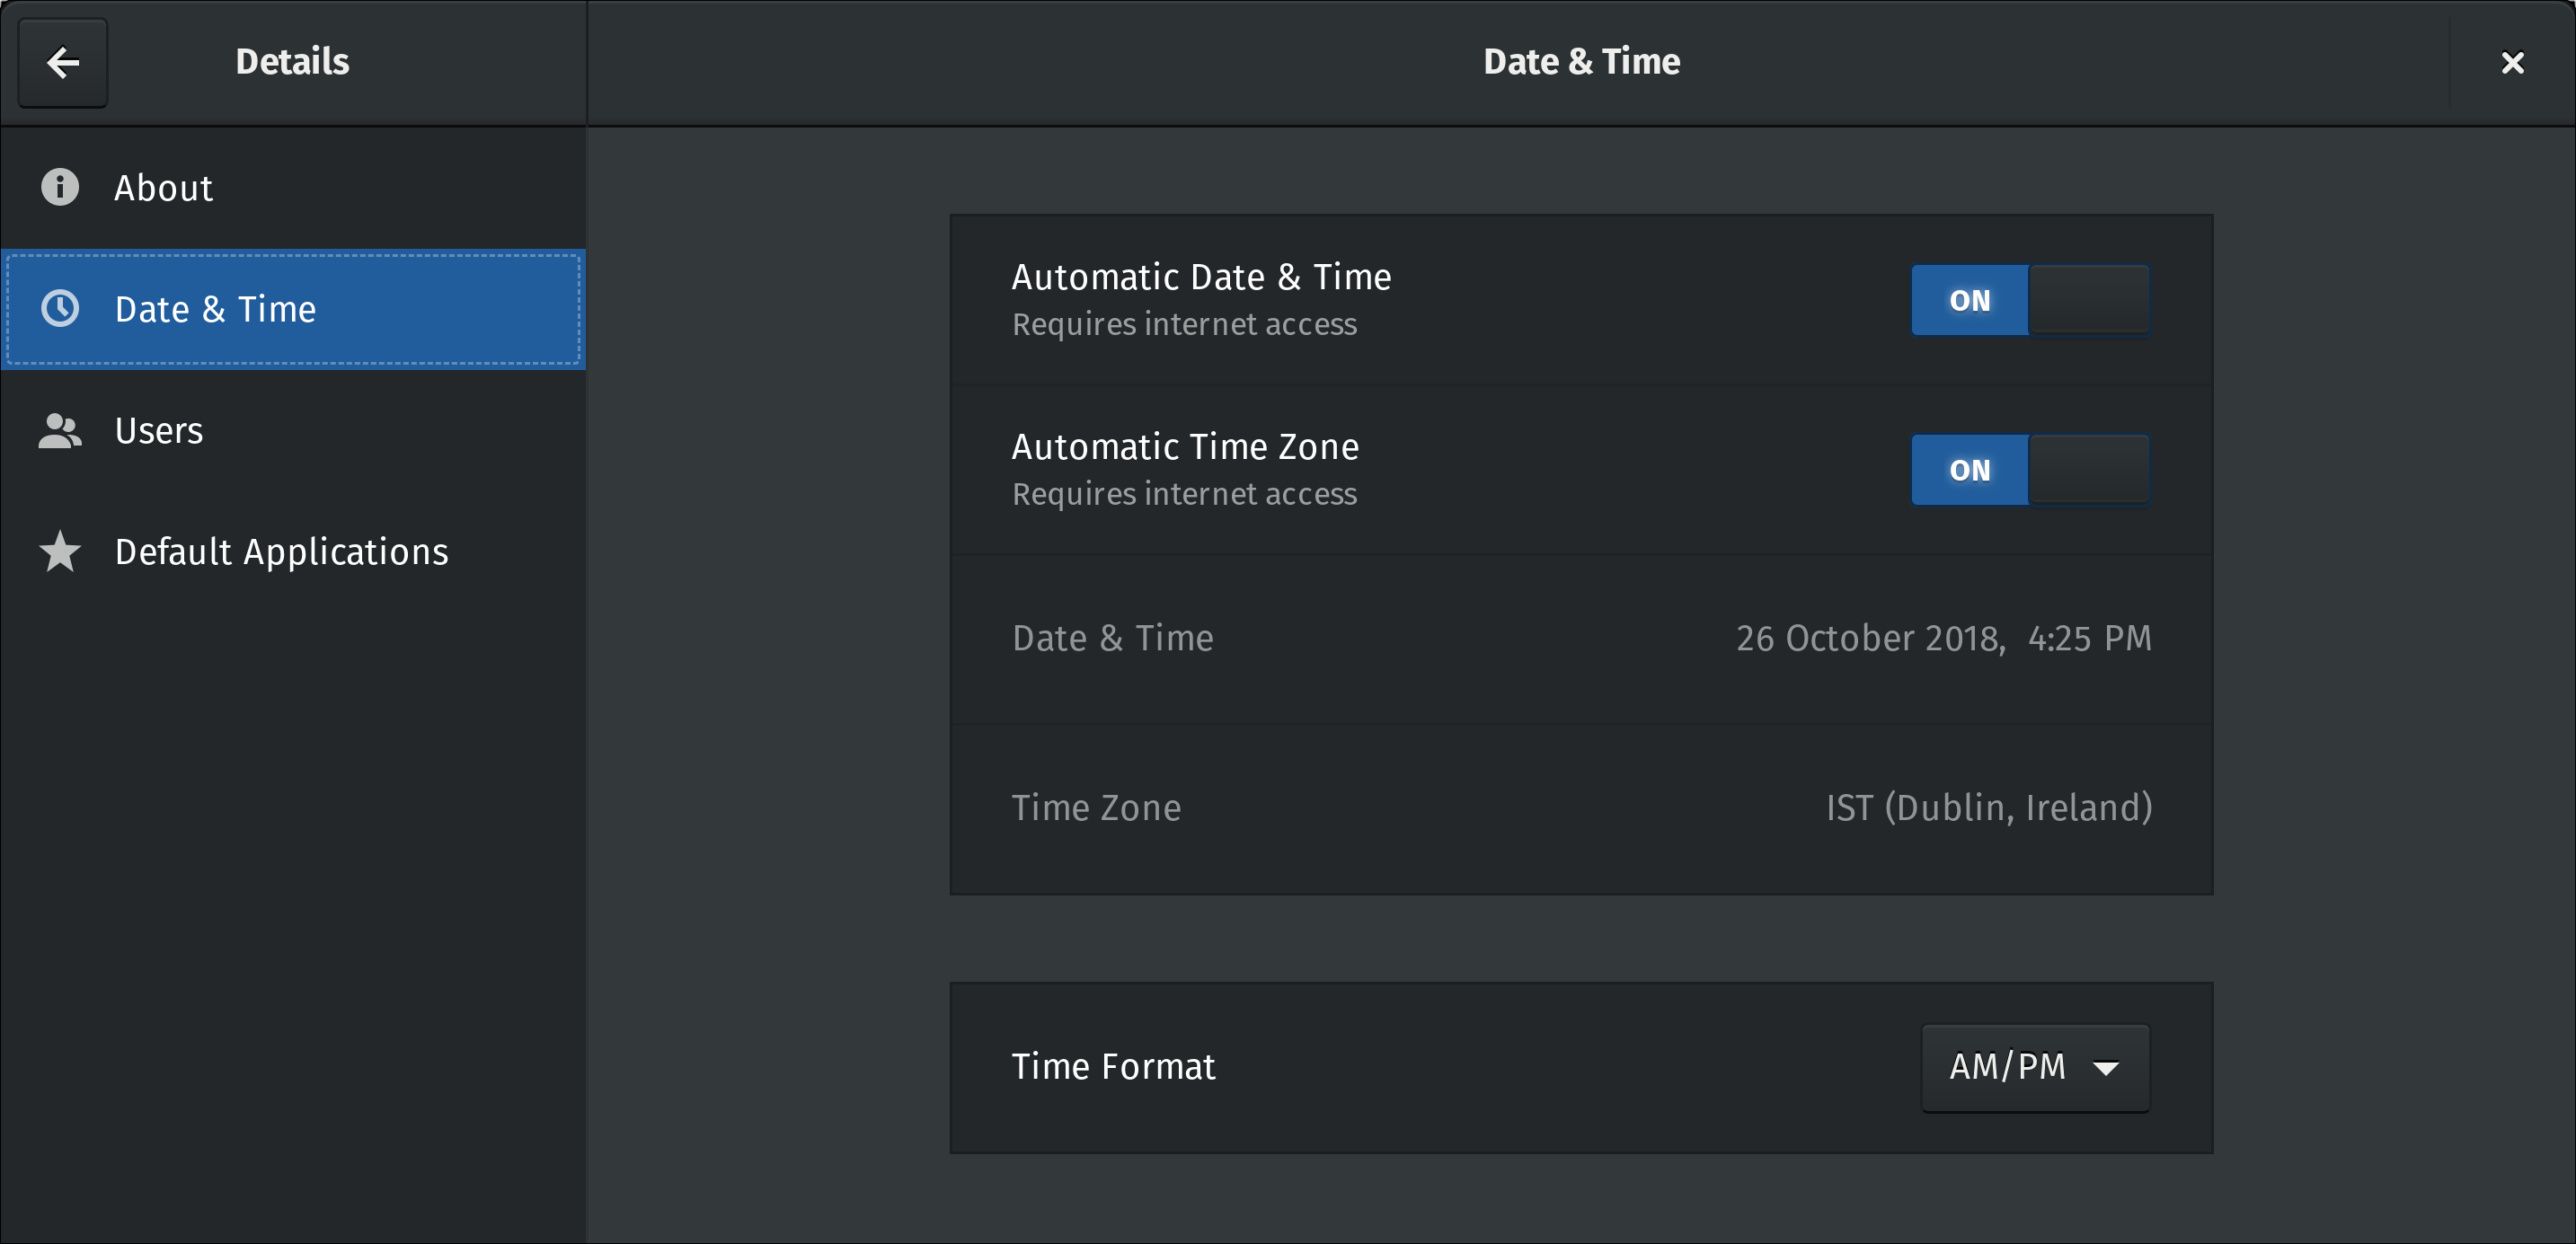 Screenshot of my Time and Date settings showing that even though automatic date and time and automatic time zone are set to ON, the time has not updated.